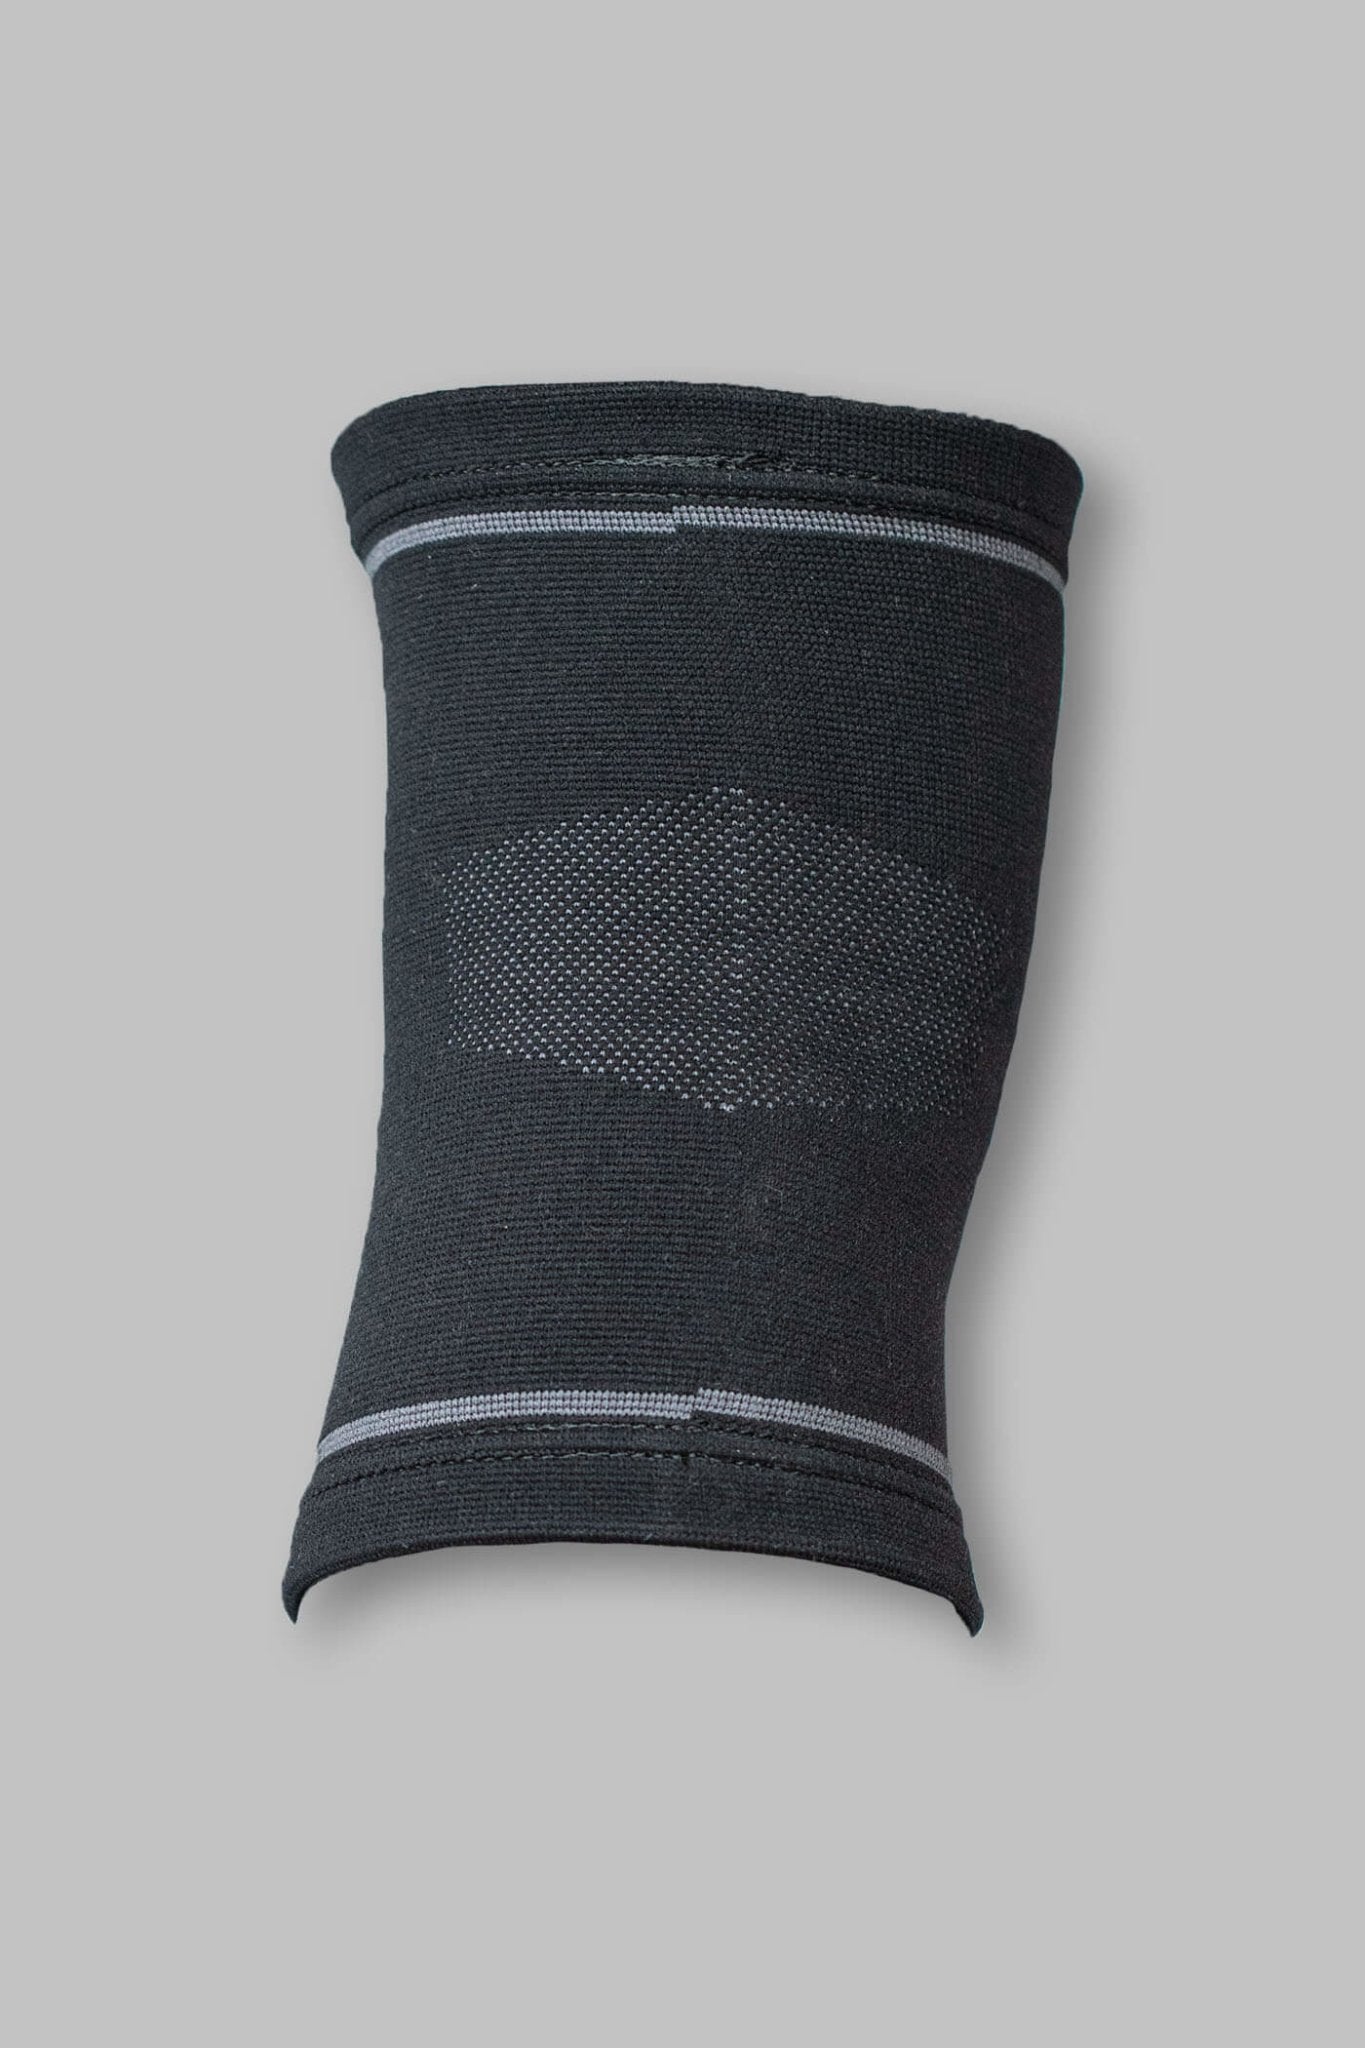 Knee Support in Black - Gain The Edge US